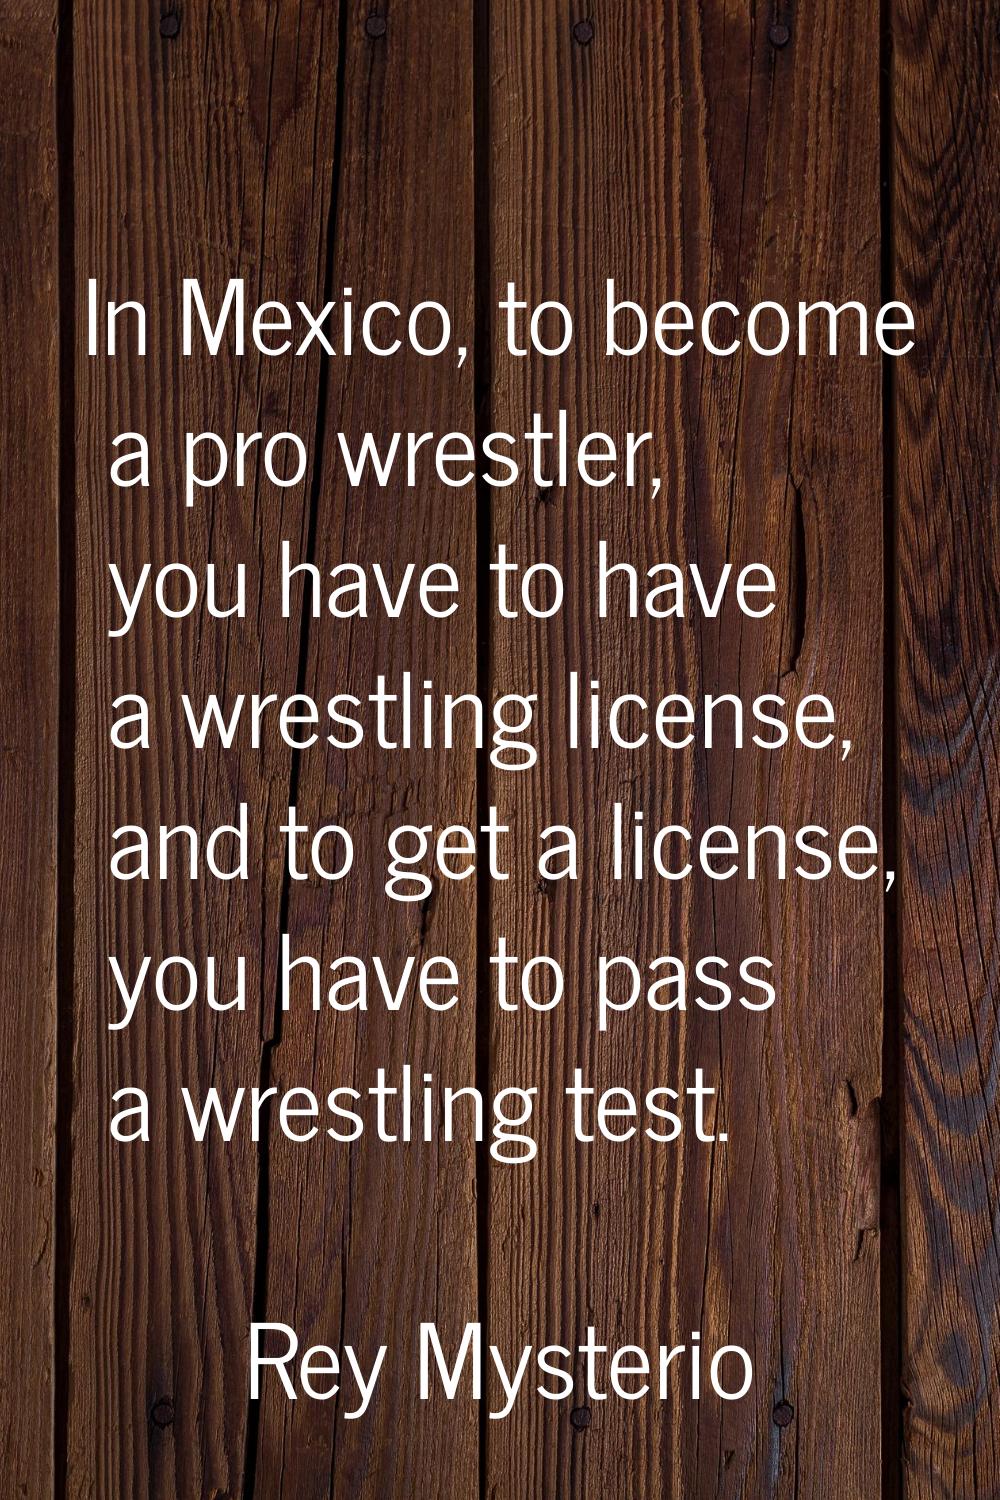 In Mexico, to become a pro wrestler, you have to have a wrestling license, and to get a license, yo